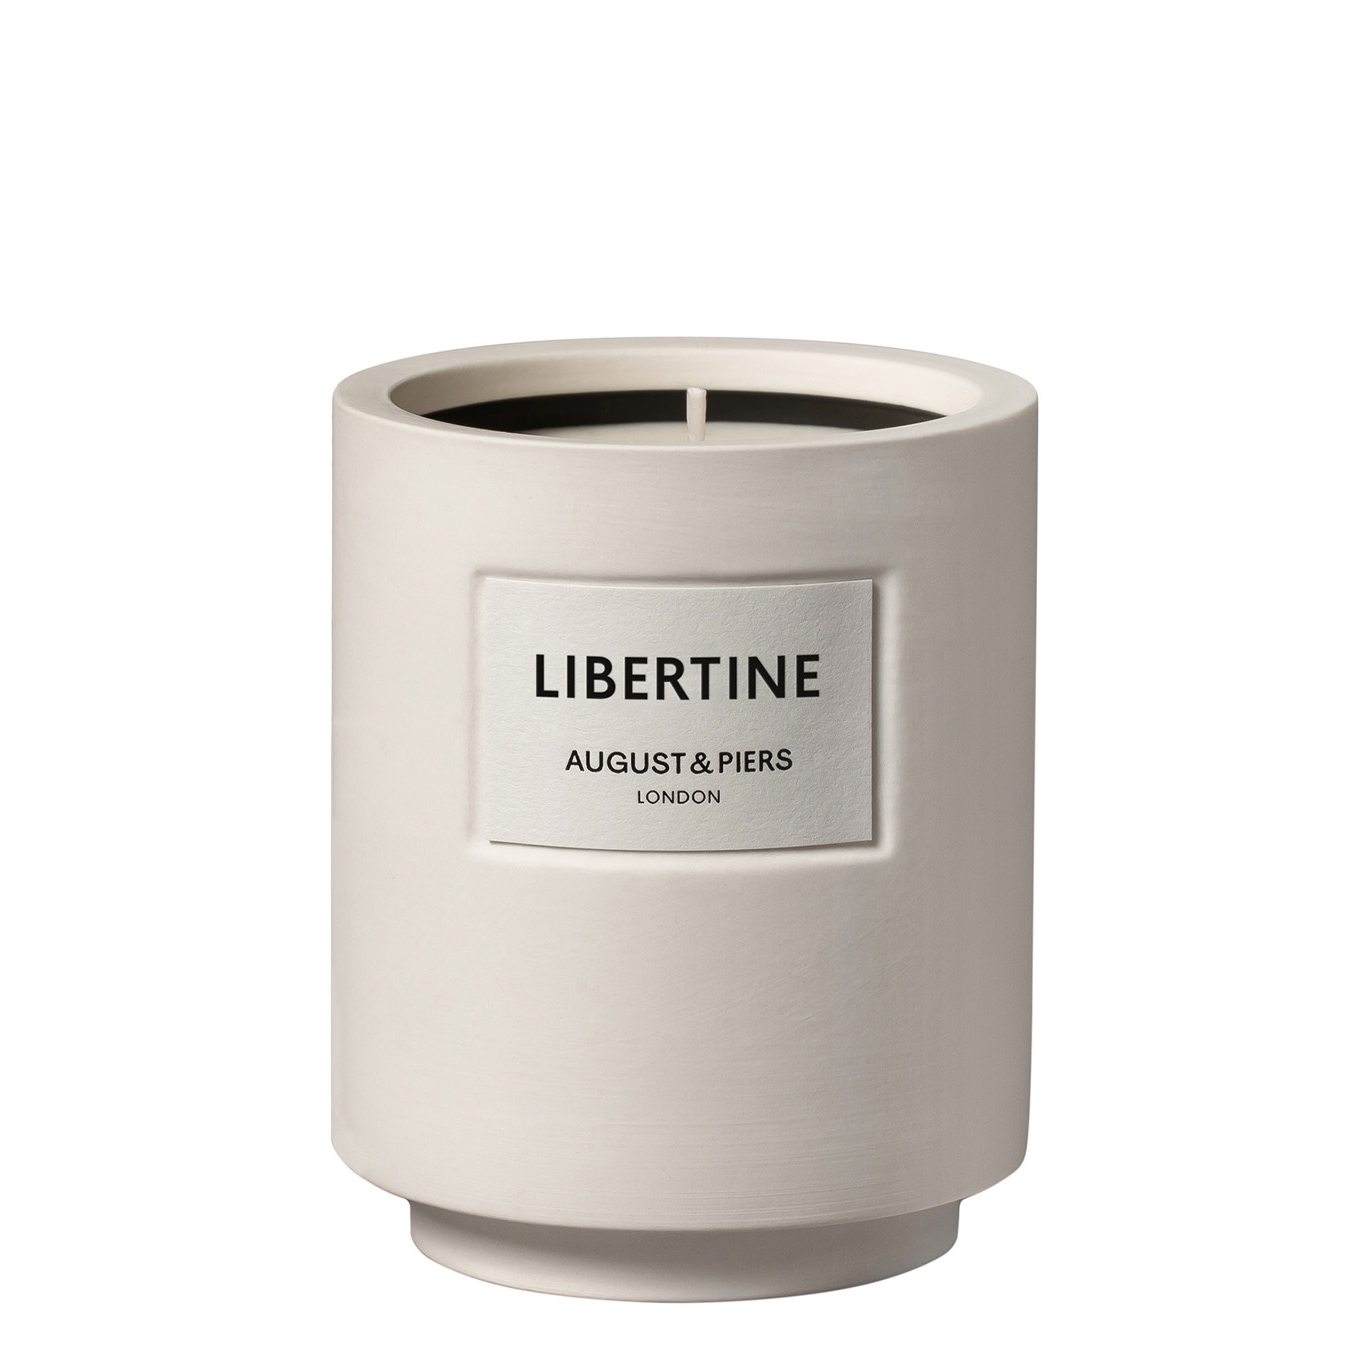 August & Piers Libertine Scented Candle 340g